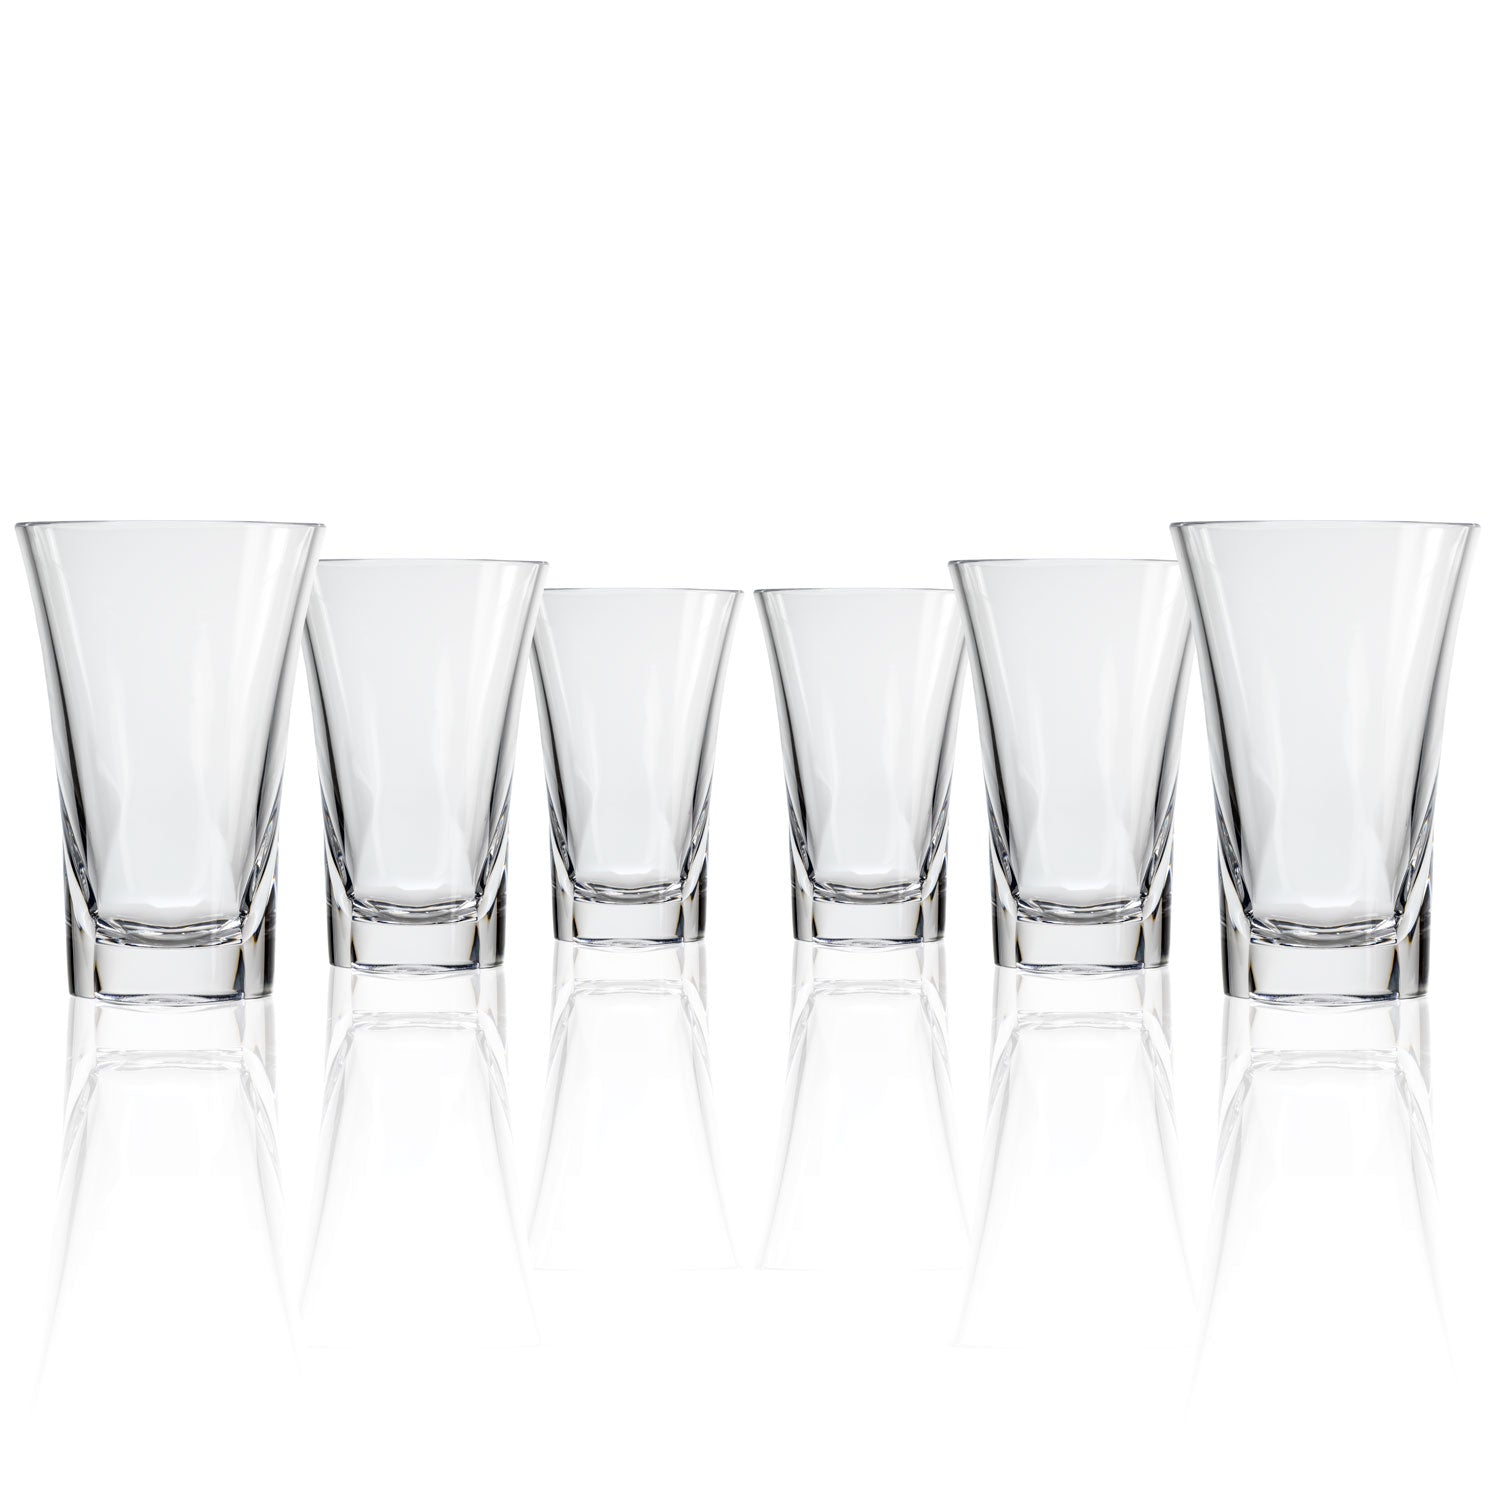 Set of 6, 16-ounce clear acrylic tumblers in the Fiori collection by Merritt Designs. Front view on white background